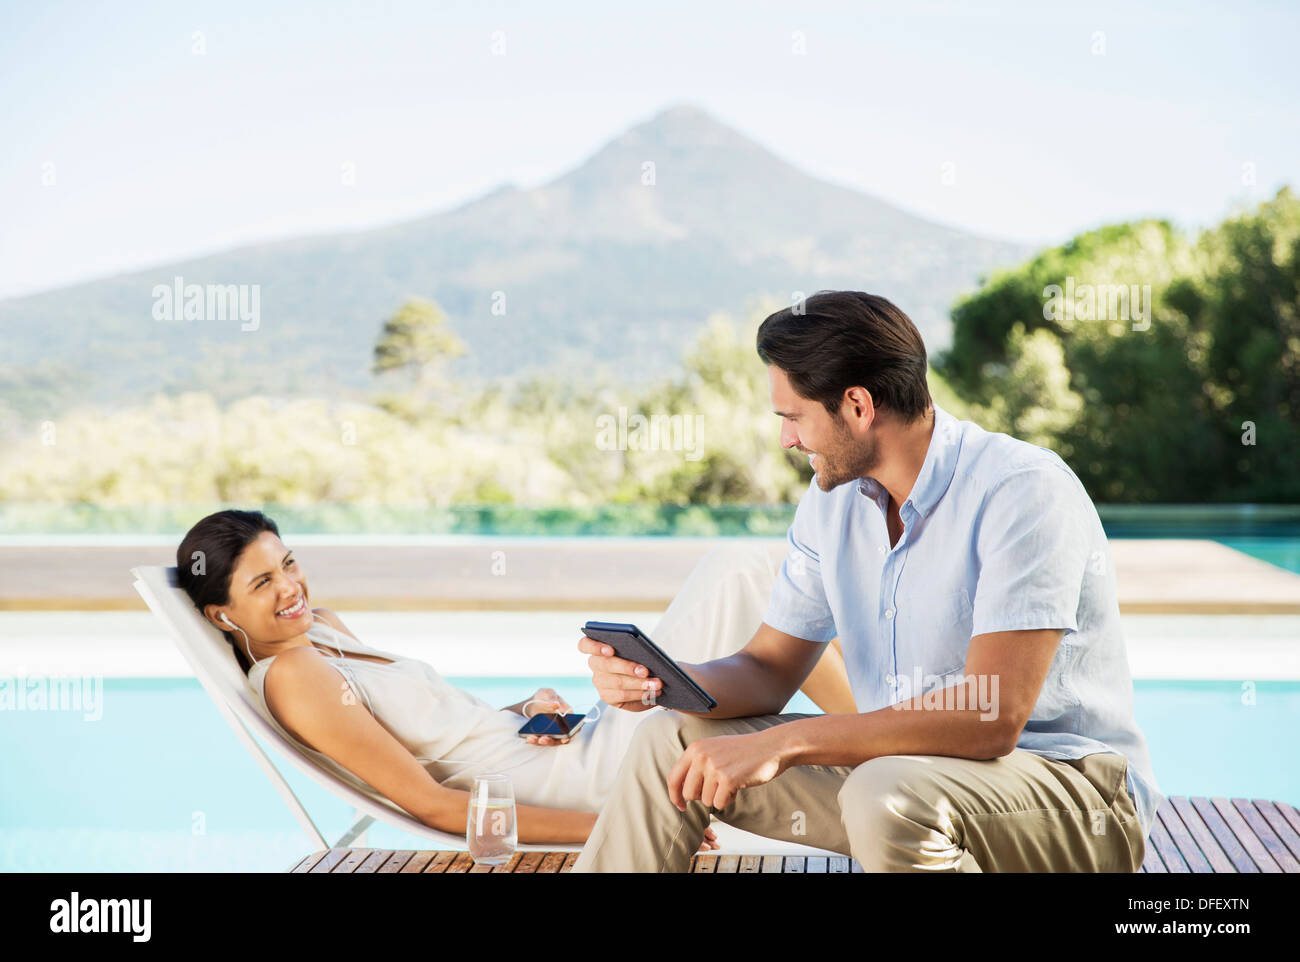 Couple relaxing poolside Banque D'Images